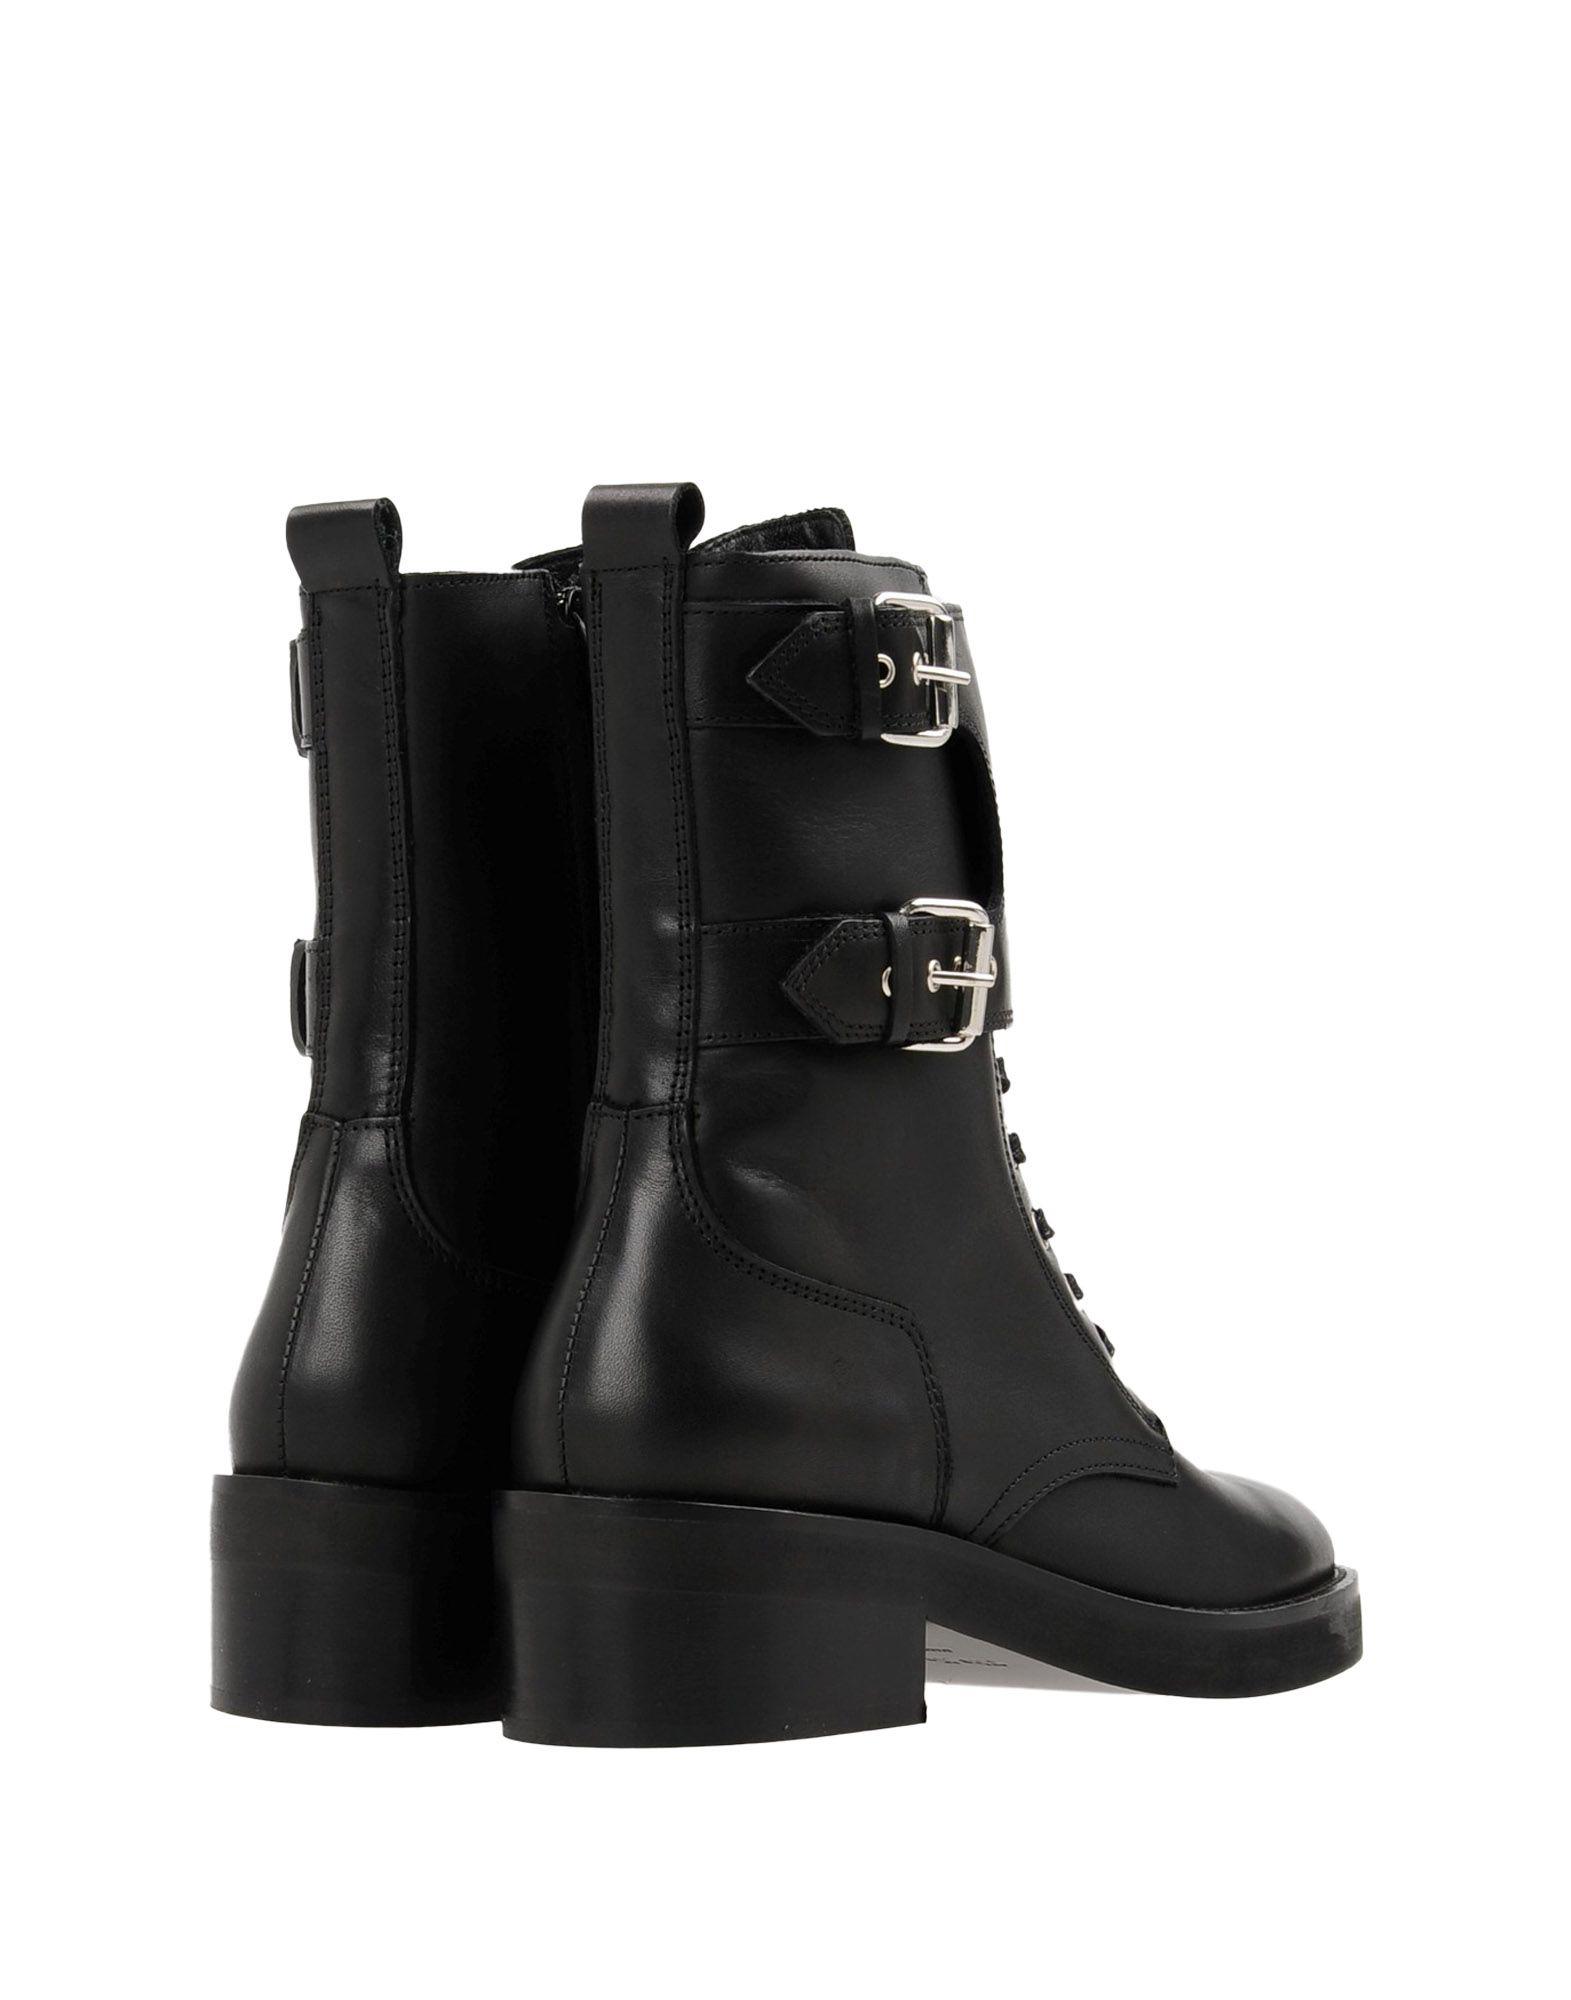 The Kooples Leather Ankle Boots in Black - Lyst